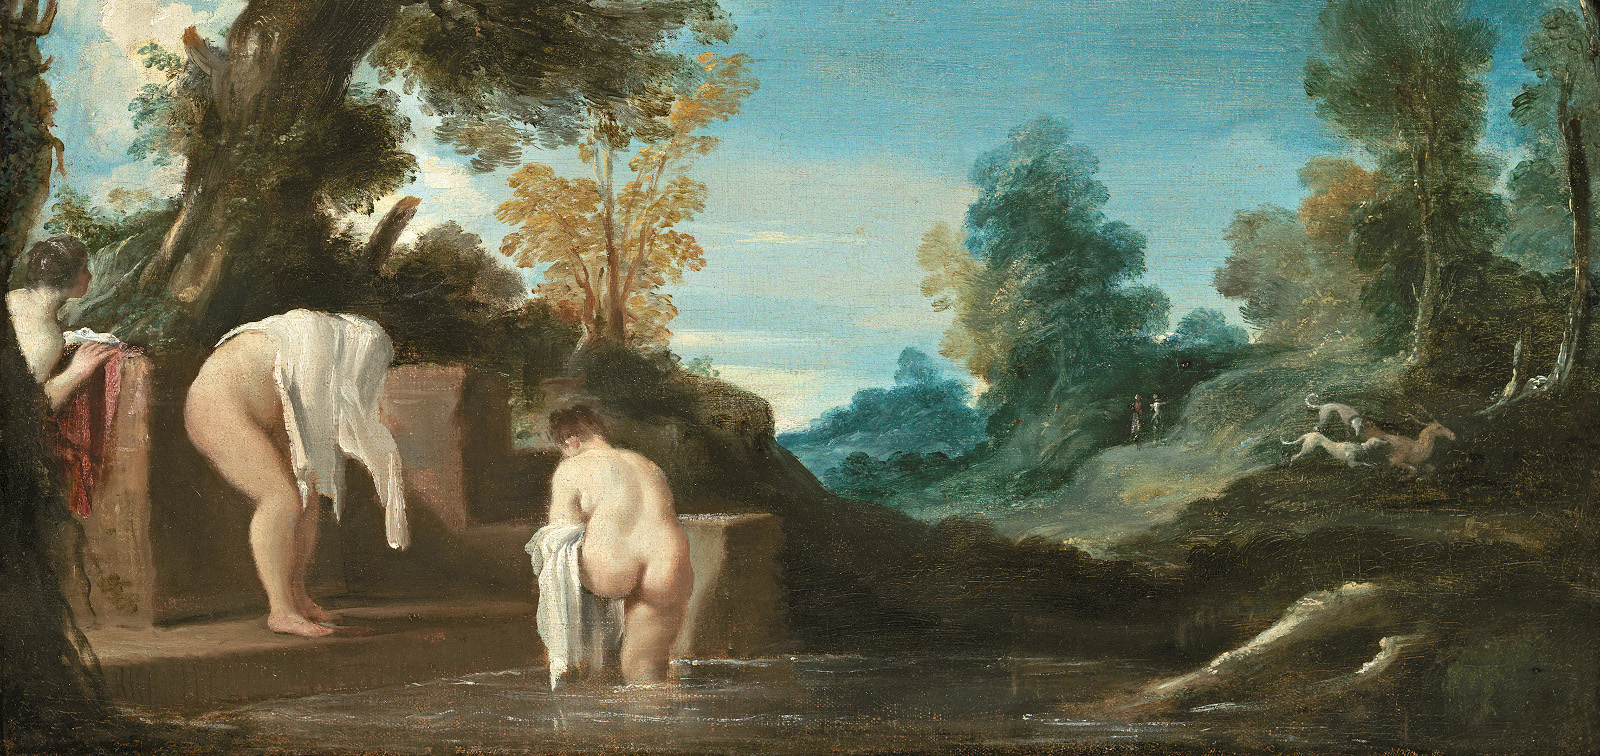 Rome: Nature and the Ideal. Landscapes 1600-1650